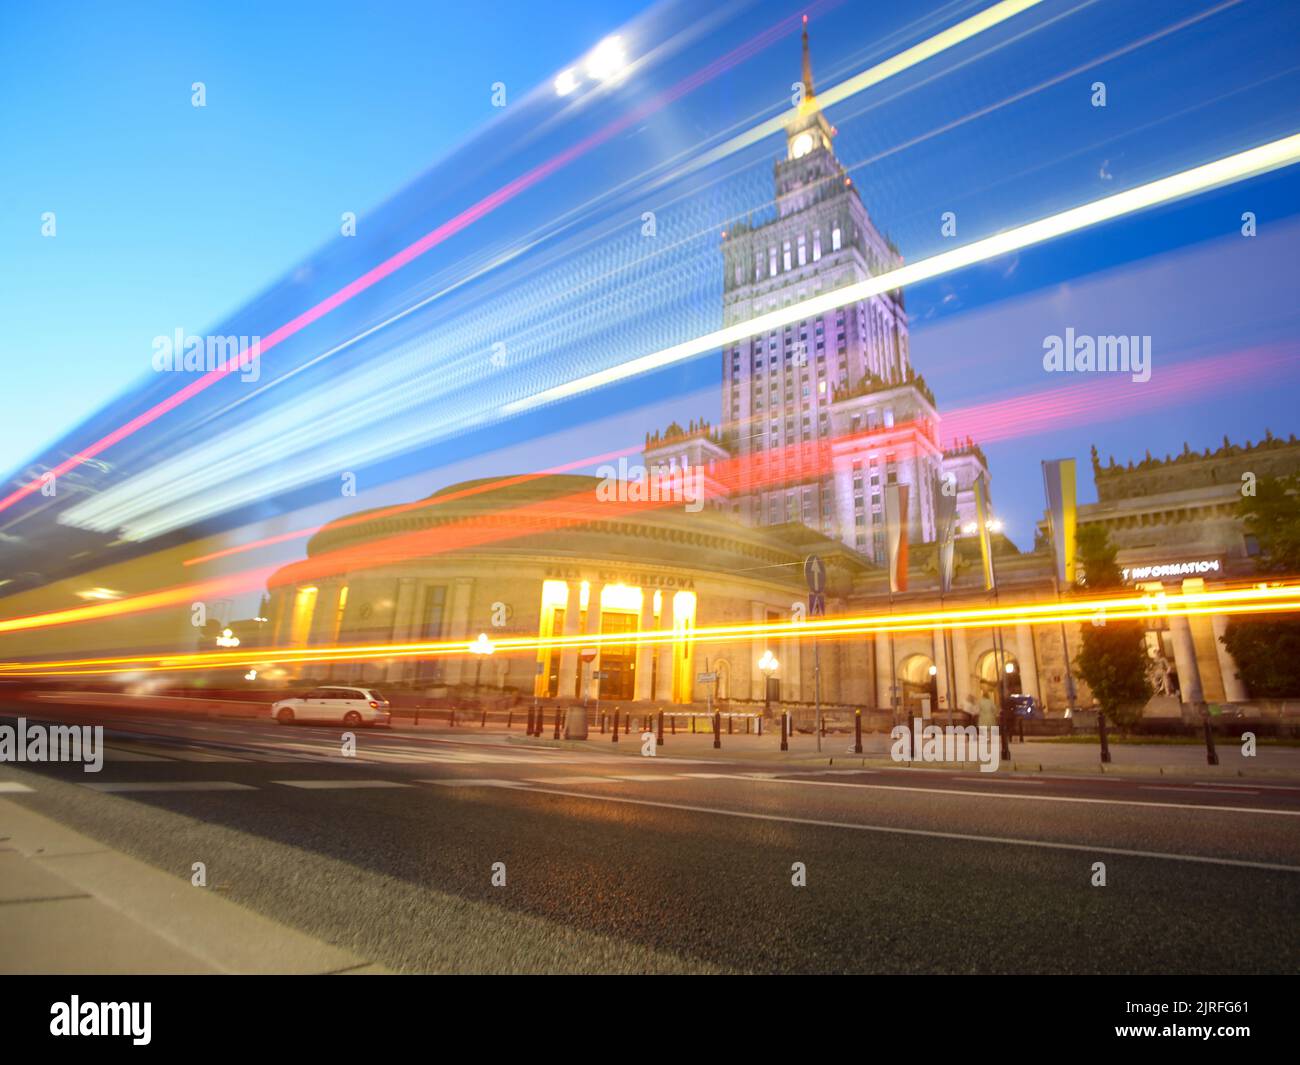 Palace of Culture and Science in Warsaw at night Stock Photo